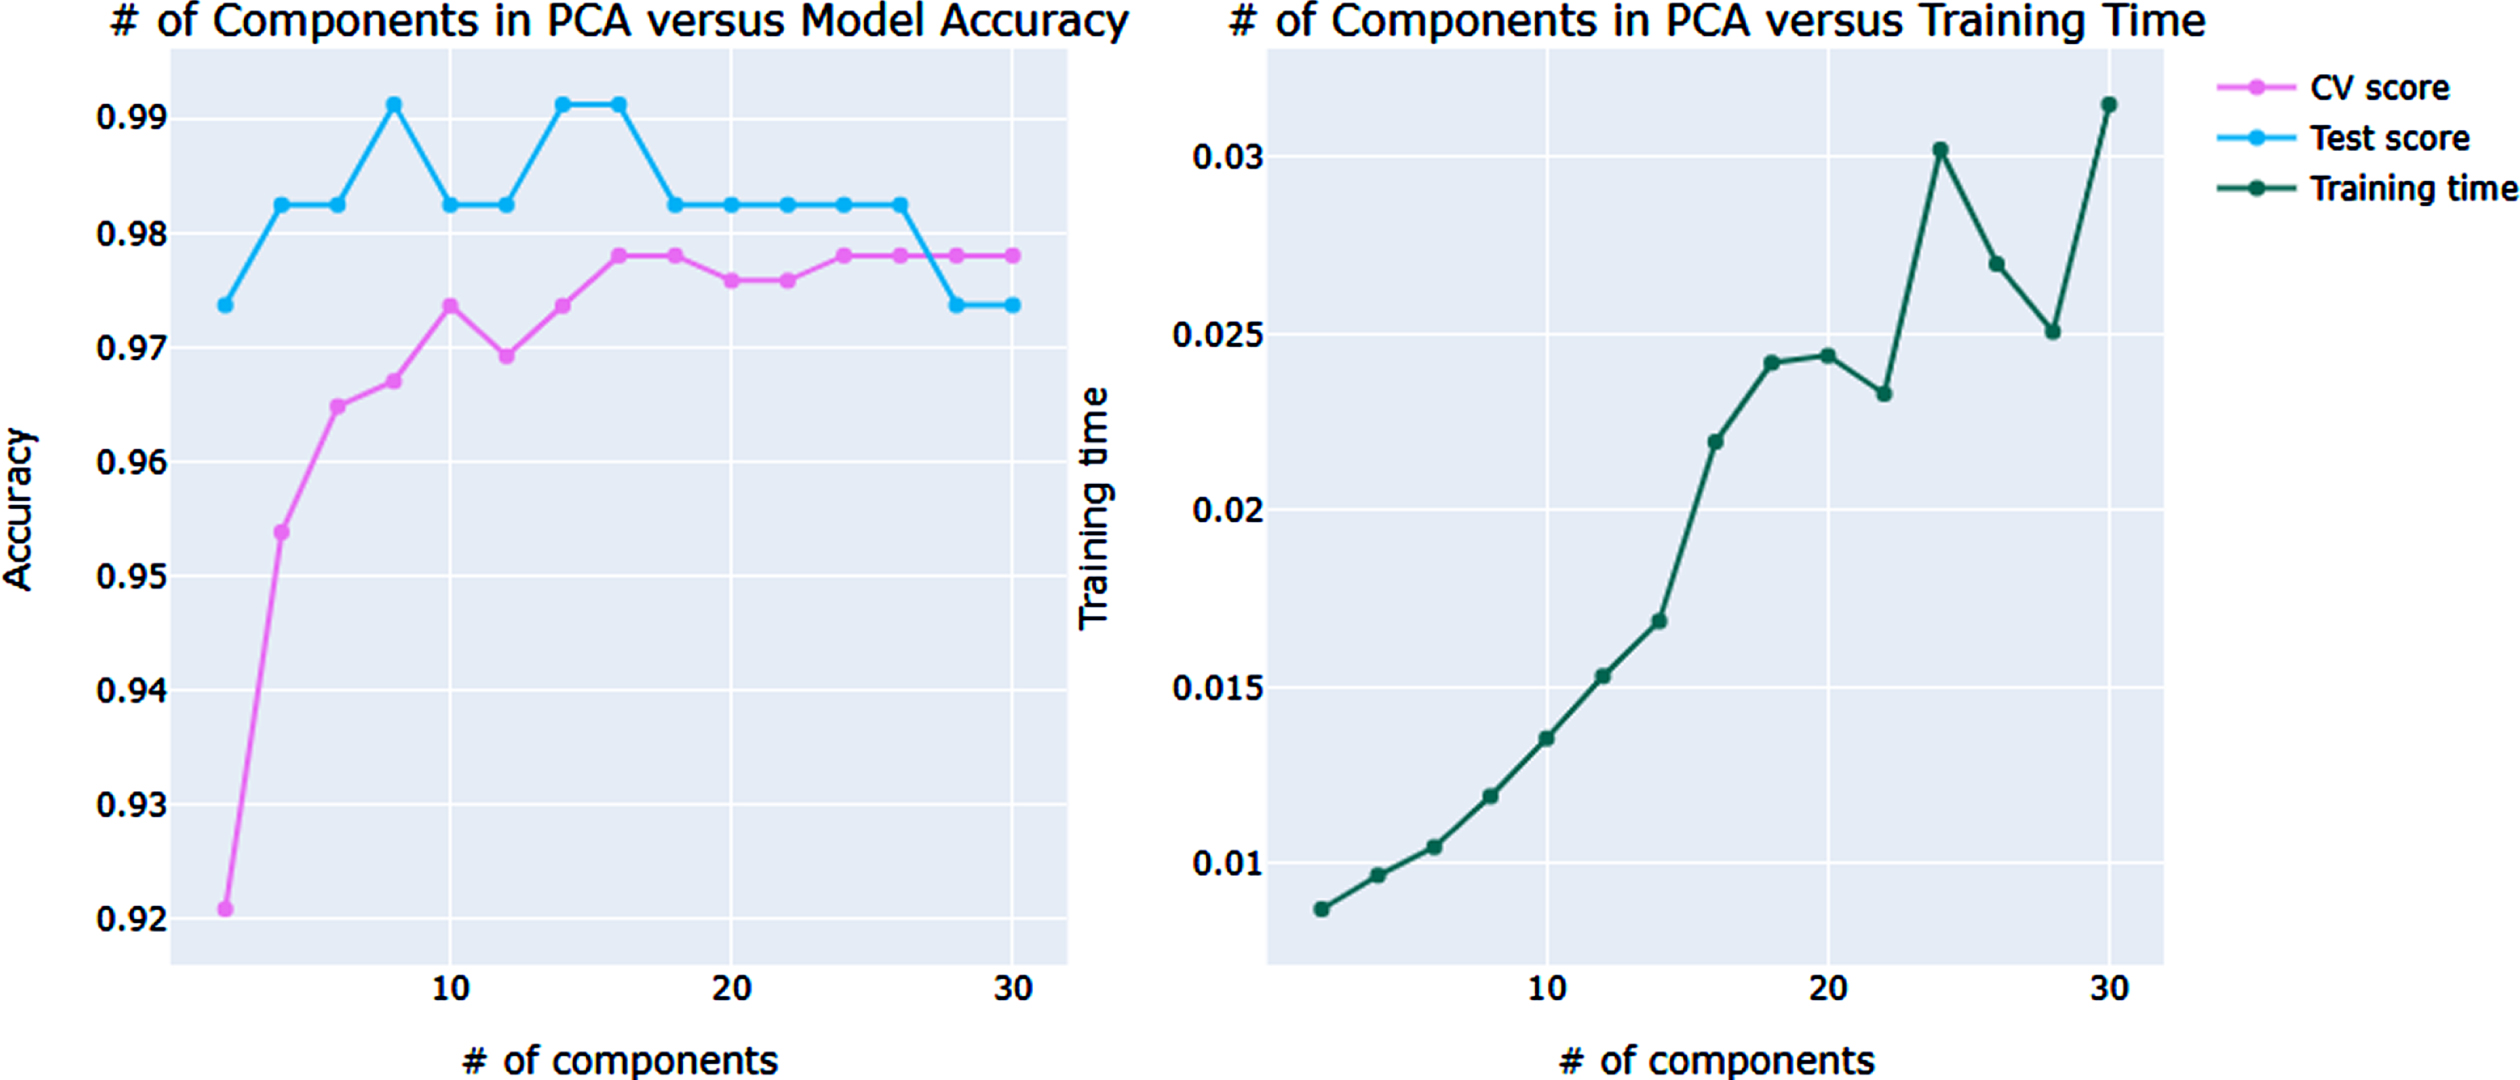 Depicting the ROC curve for the LR model between the number of components in PCA versus model accuracy/training time.